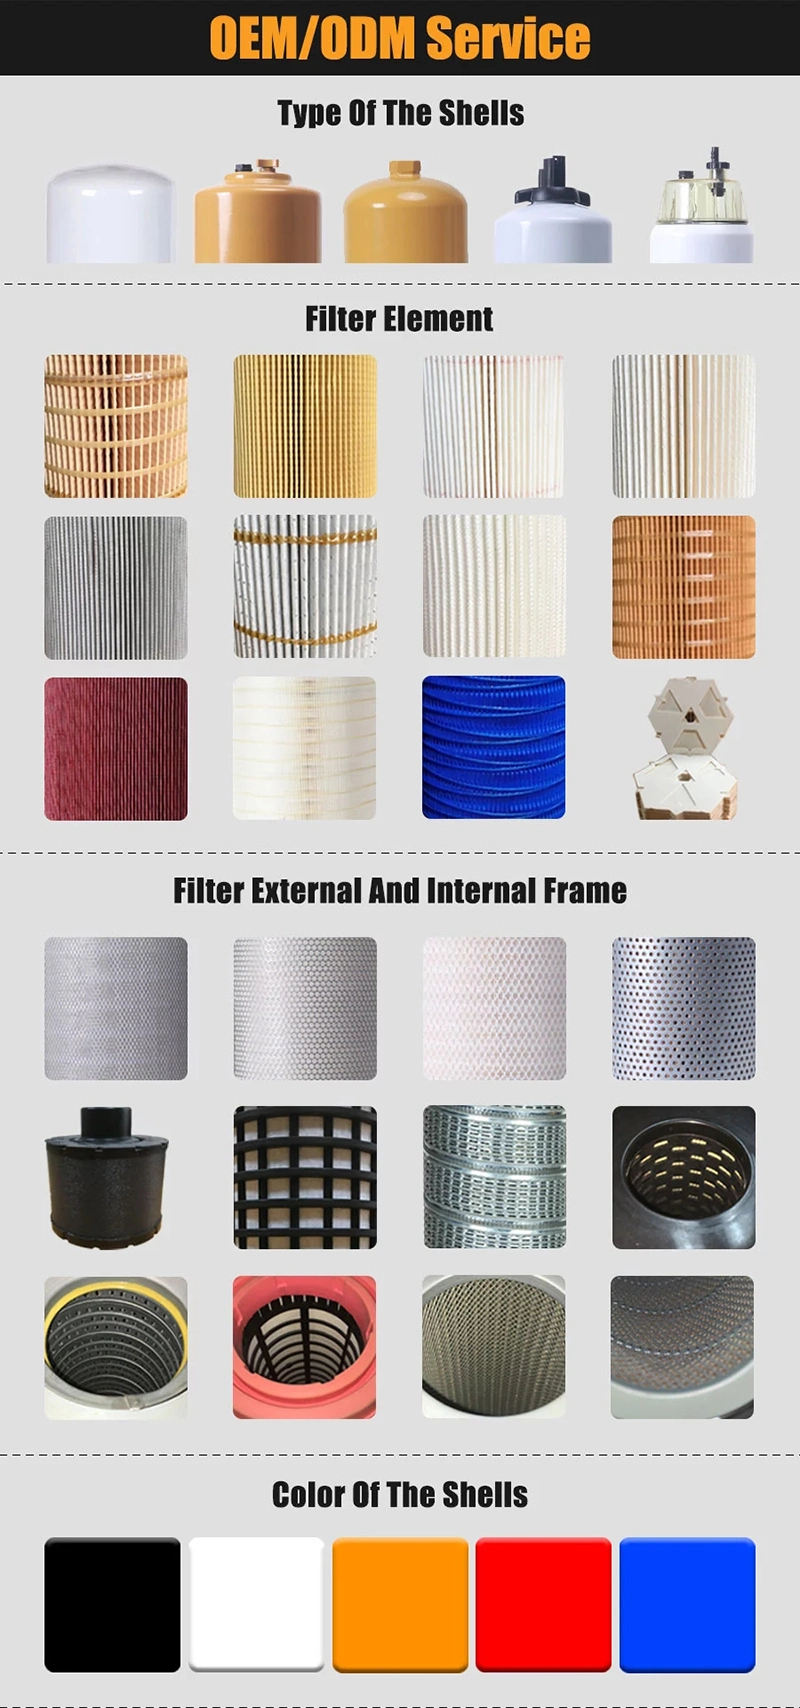 Excavator Oil Filter 1r-0713 Oil Filter Element Replace Parts 133-5673 Lf3342 Bt230 P555570 8n9586